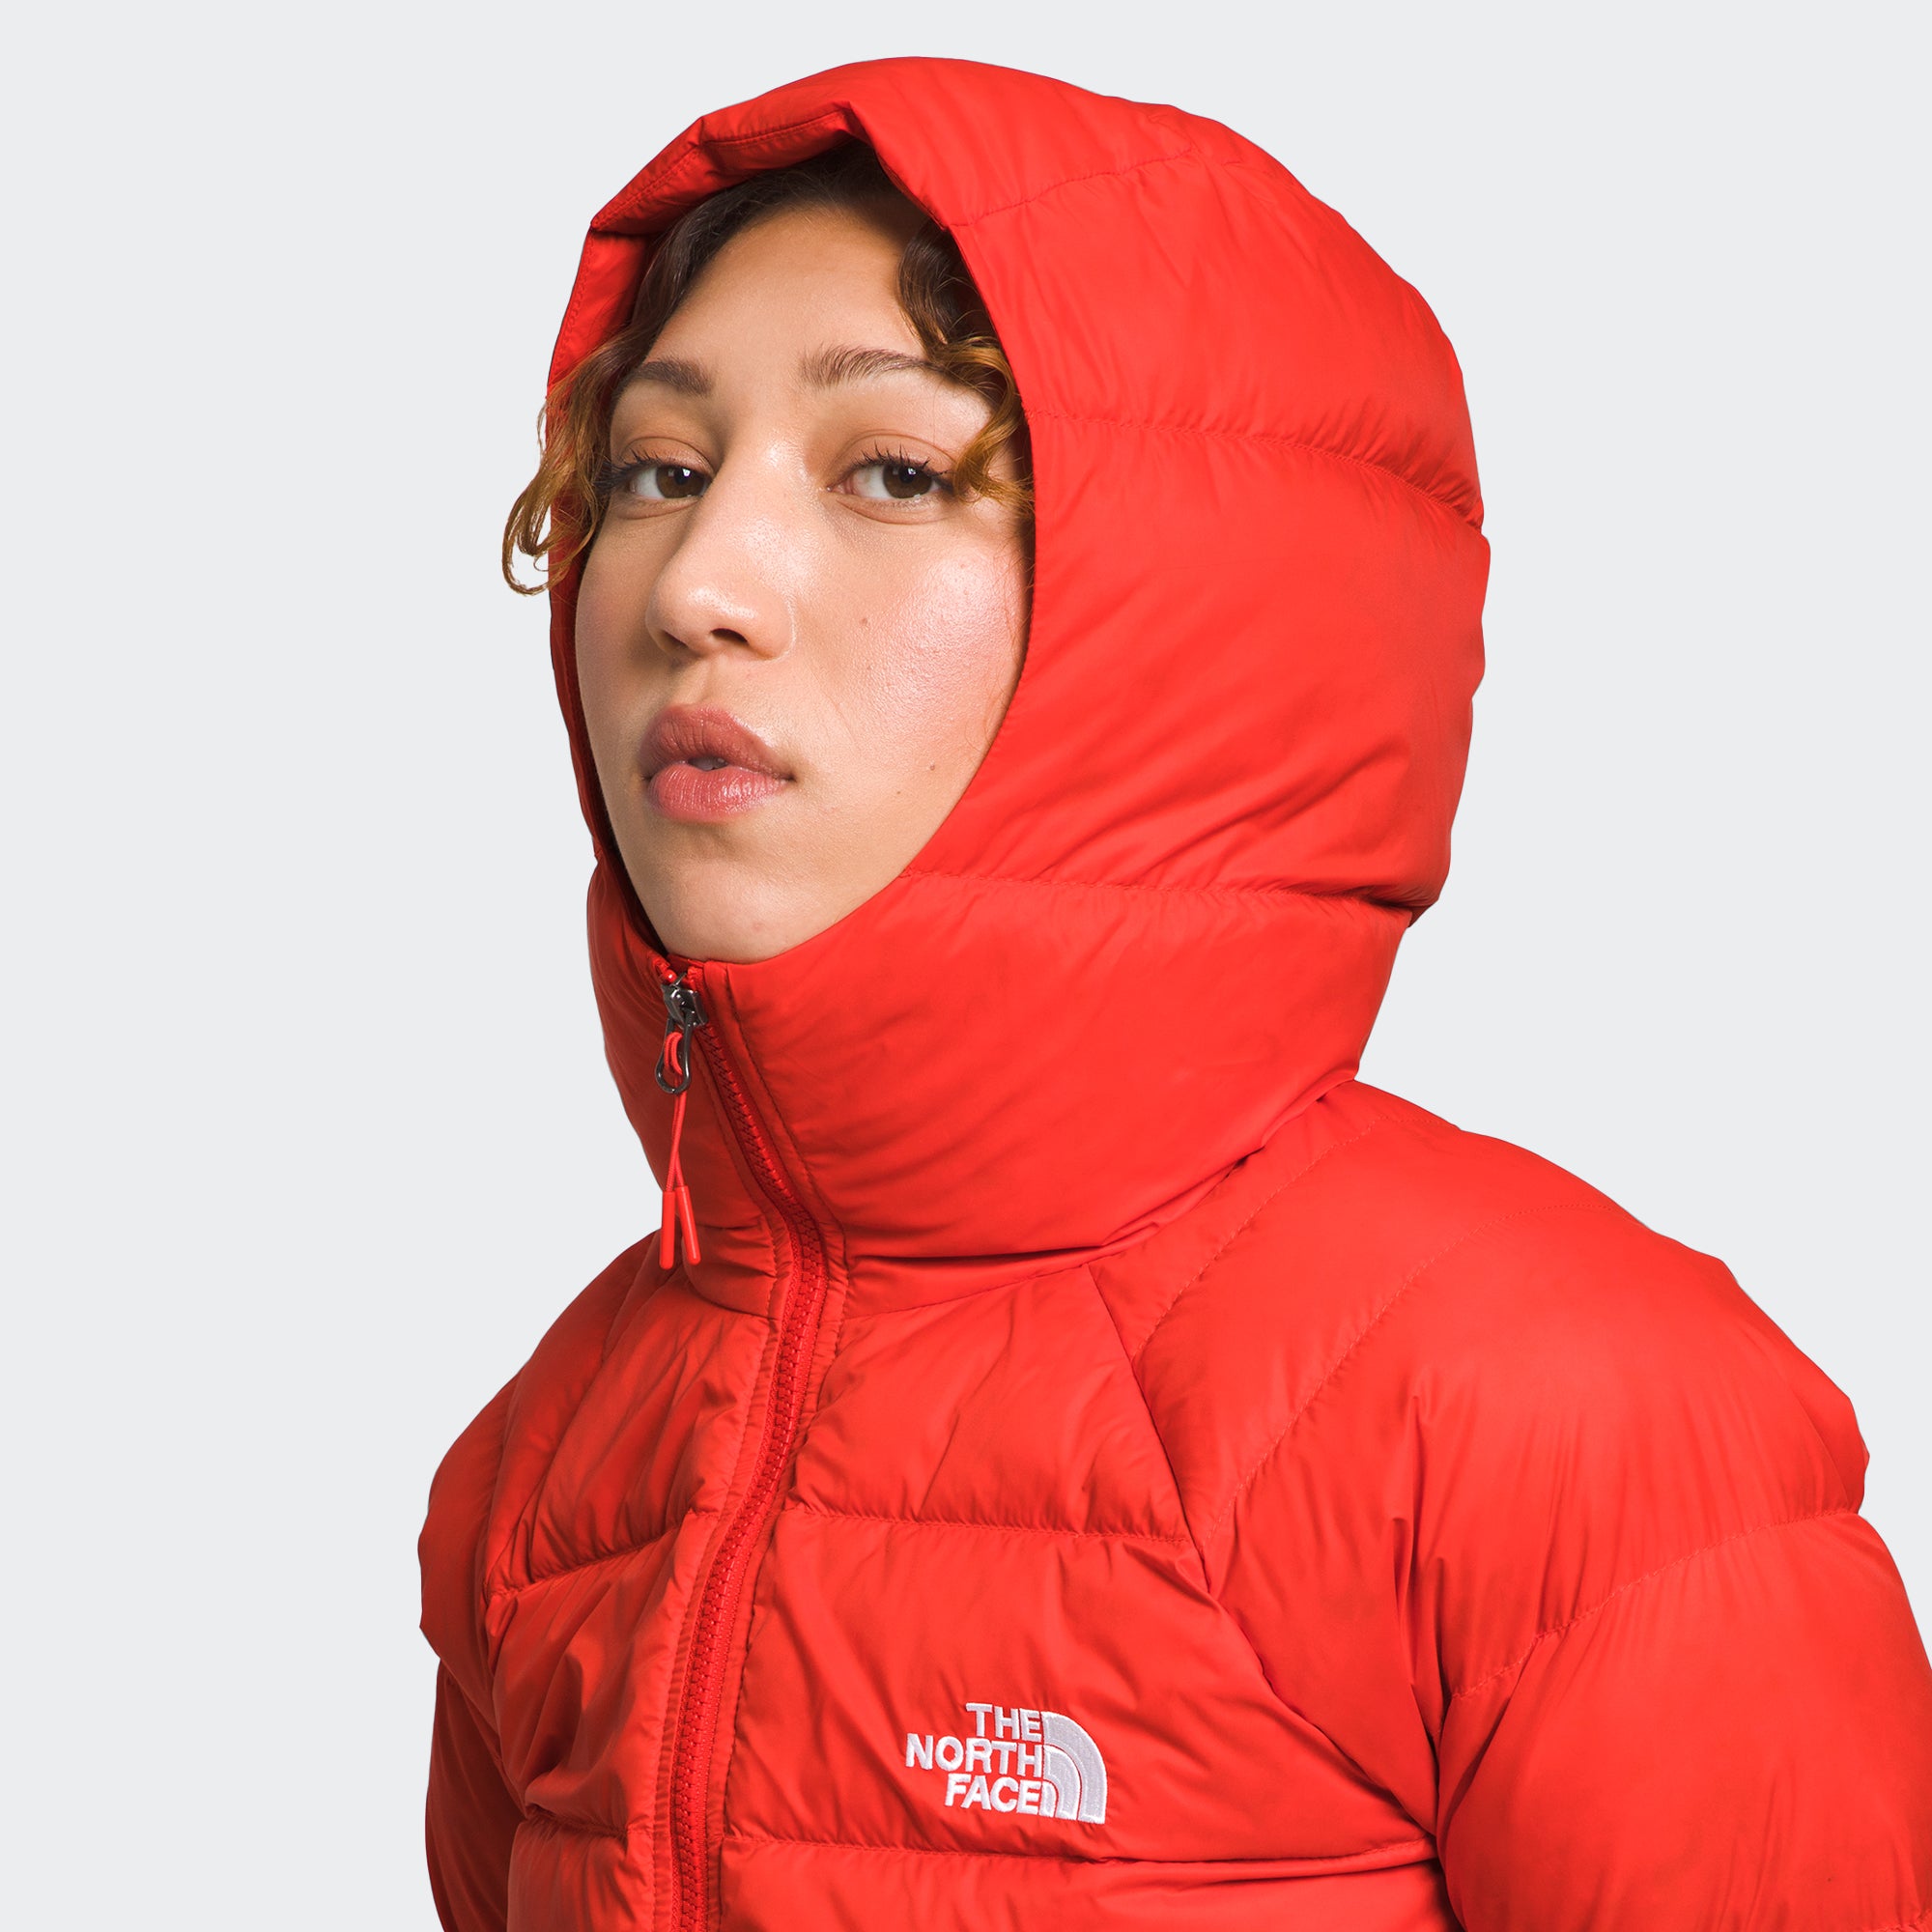 The North Face Hydrenalite City Hoodie Chicago | Sports Jacket Down